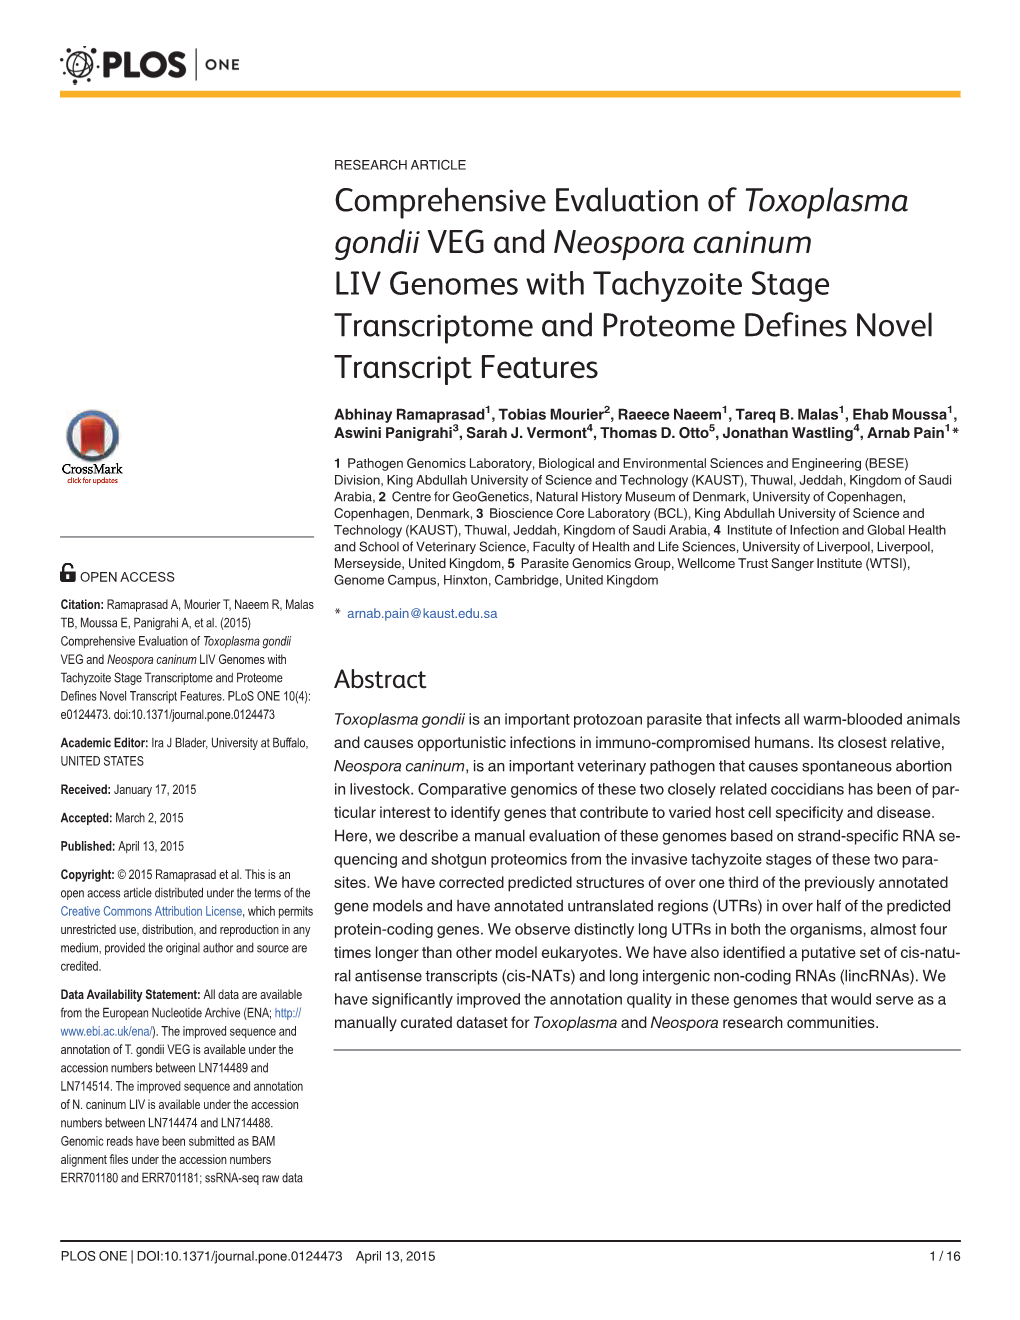 Comprehensive Evaluation of Toxoplasma Gondii VEG and Neospora Caninum LIV Genomes with Tachyzoite Stage Transcriptome and Proteome Defines Novel Transcript Features